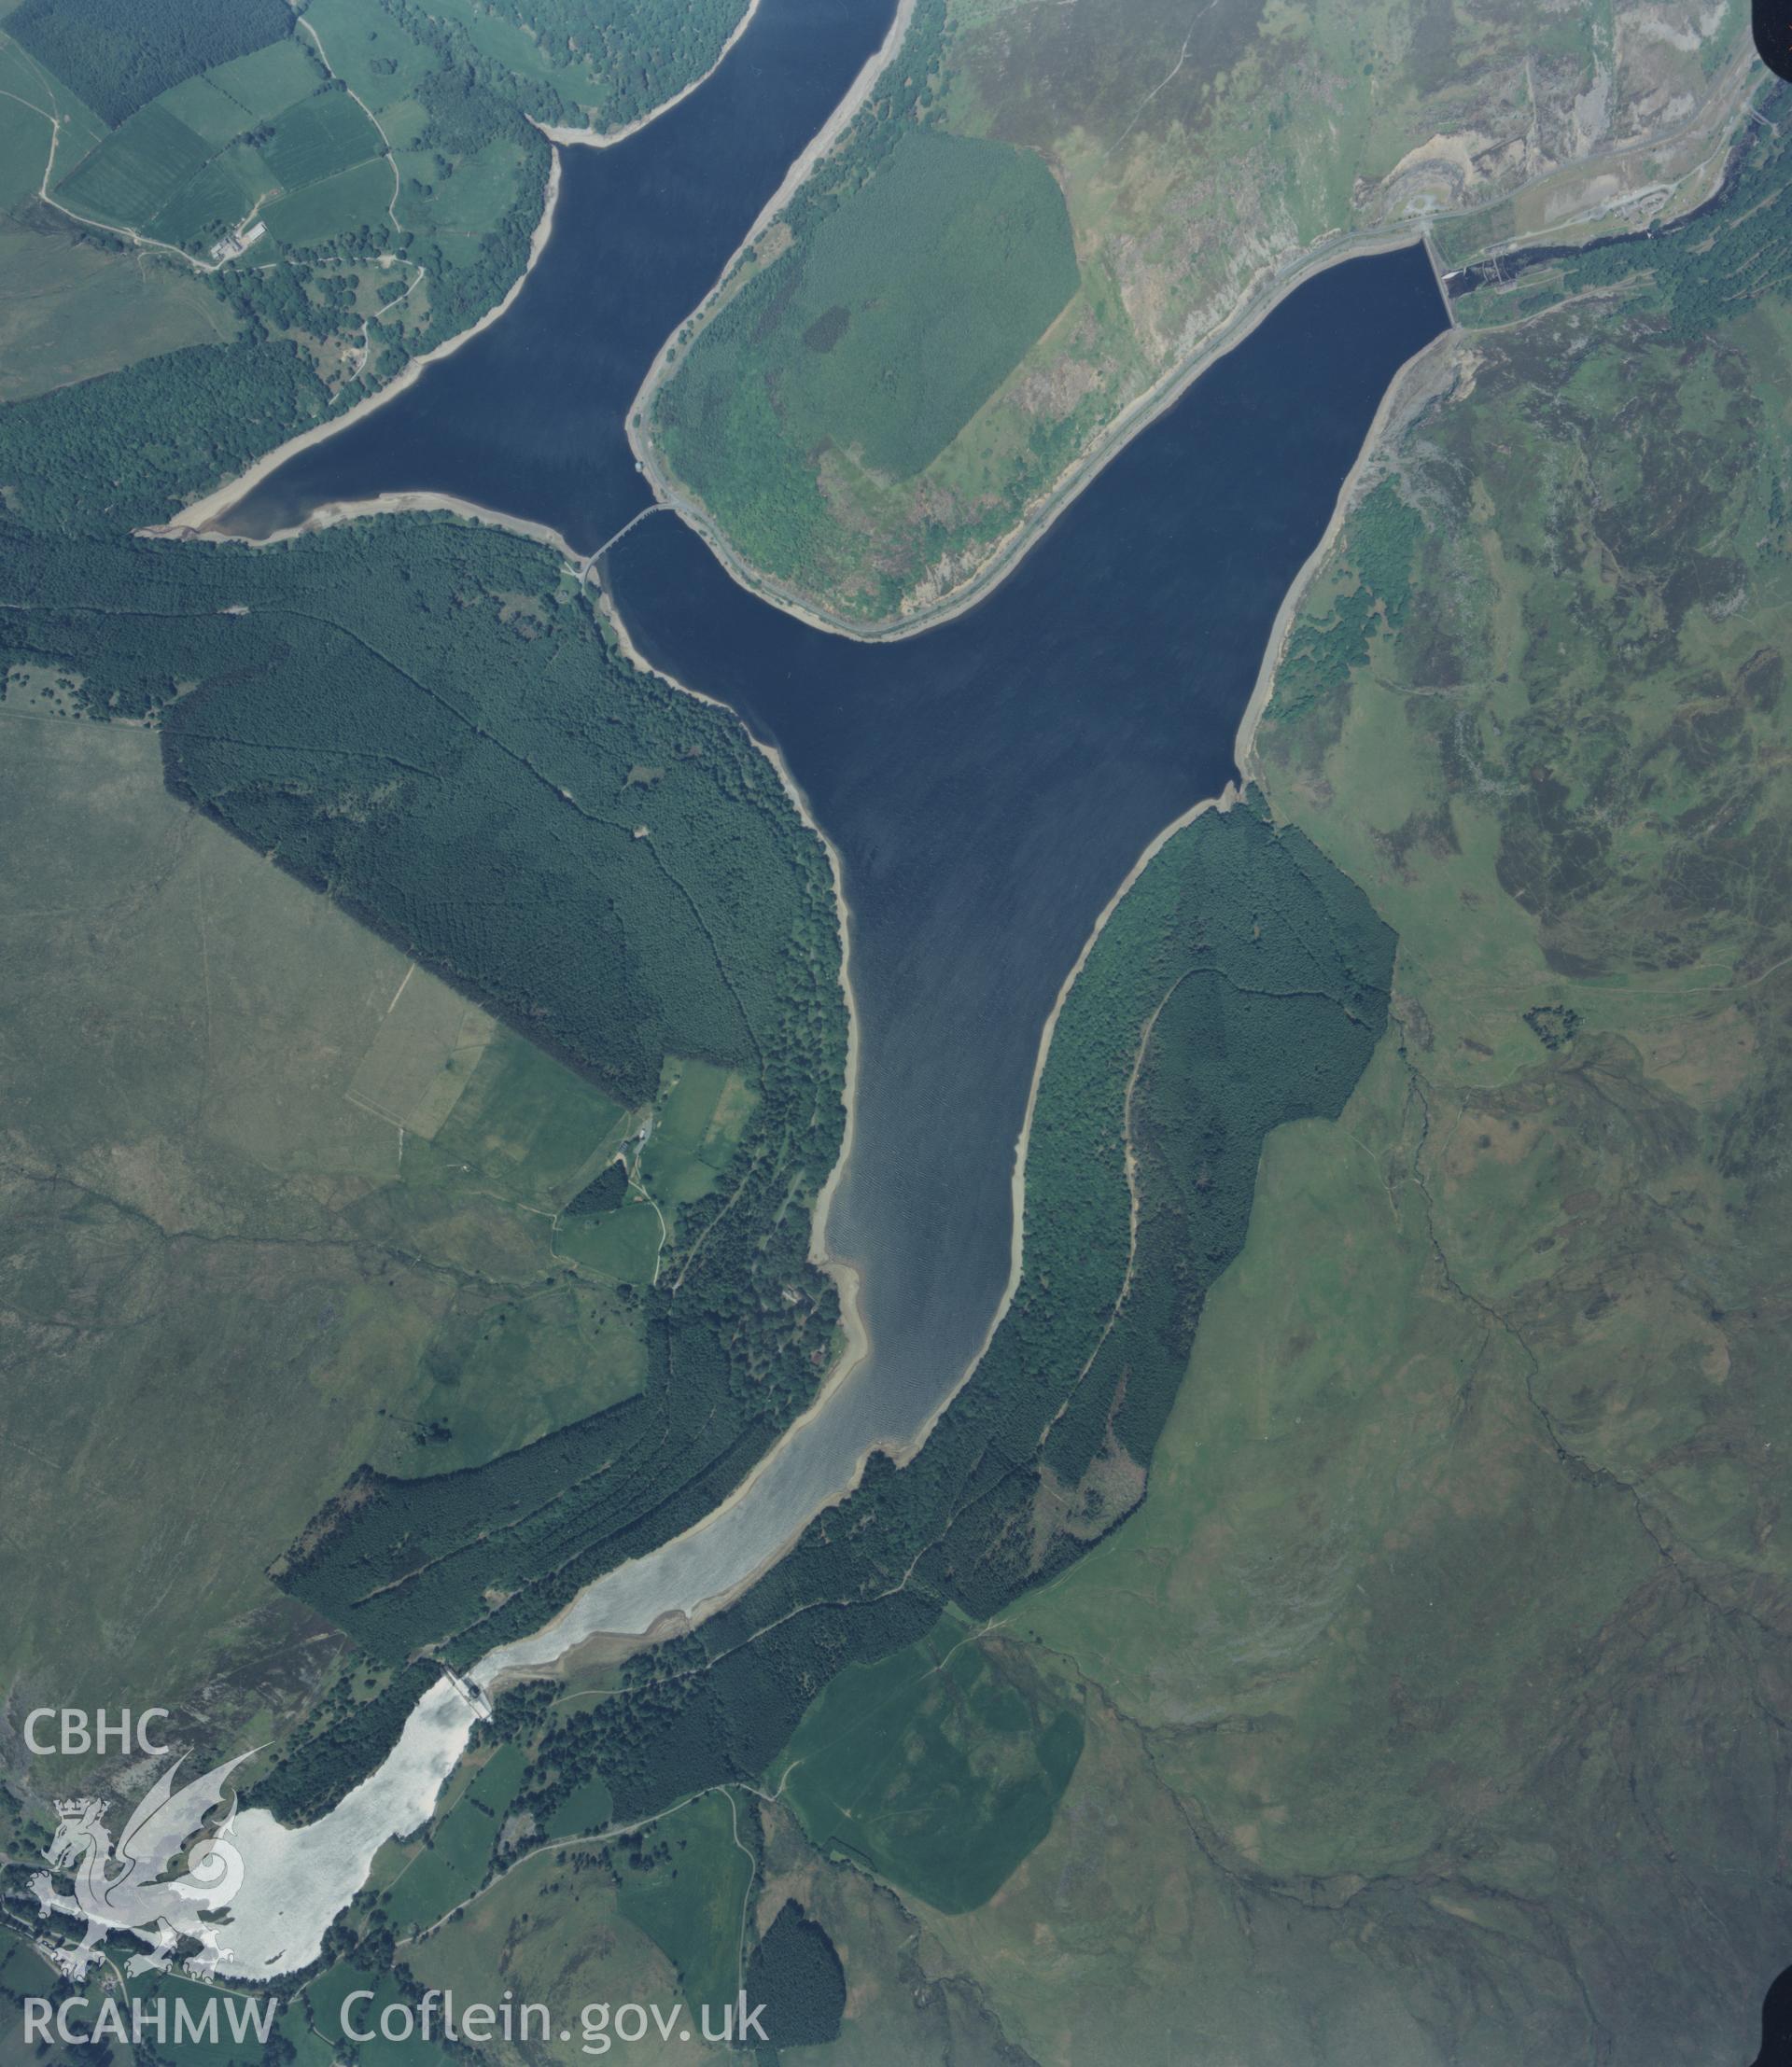 Aerial photograph of the Elan Valley, dated 1995. Included in material relating to Archaeological Desk Based Assessment of Afon Claerwen, Elan Valley, Rhayader, Powys. Assessment conducted by Archaeology Wales in 2018. Report no. 1681. Project no. 2573.